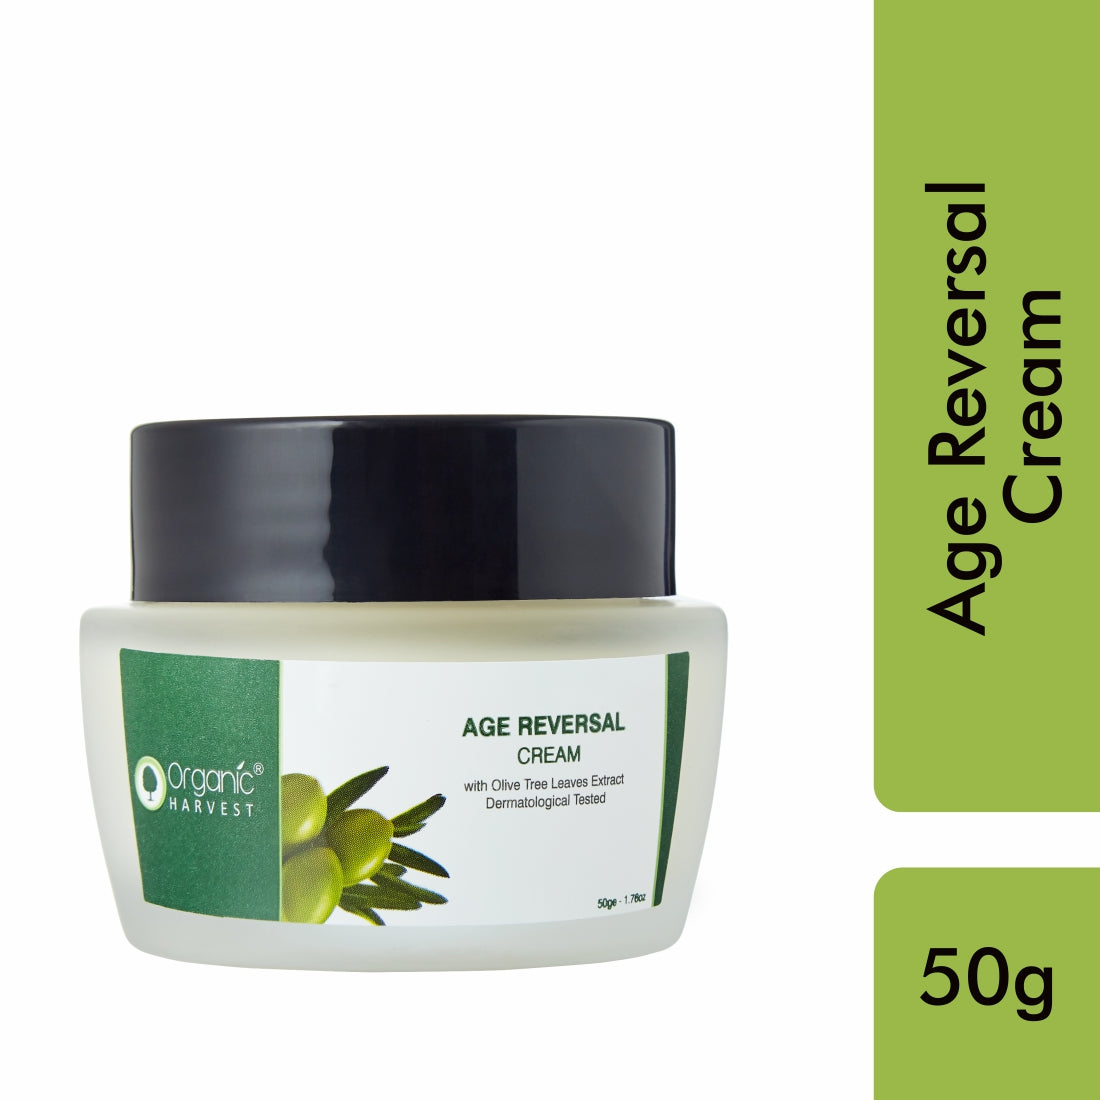 Age Reversal Cream with Olive Tree Leaves Extract, Delays Signs of Ageing, Reduces Fine Lines & Wrinkles, Boost Skin Elasticity